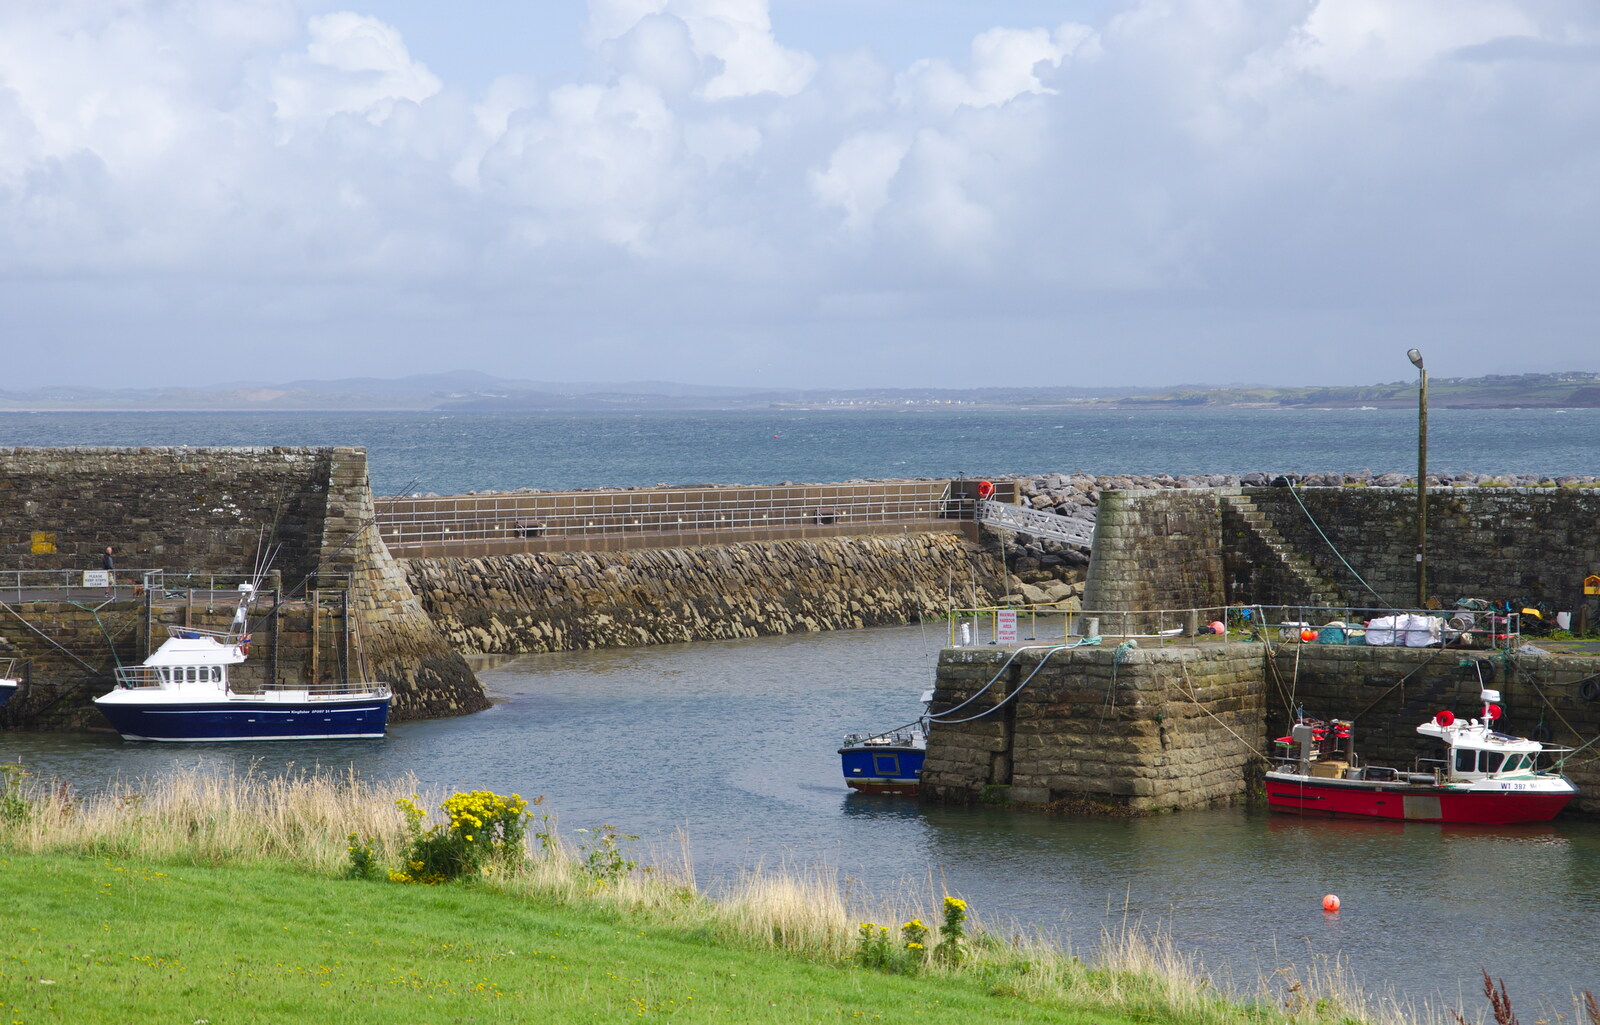 The harbour wall in Mullaghmore from Mullaghmore Beach and Marble Arch Caves, Sligo and Fermanagh, Ireland - 19th August 2019